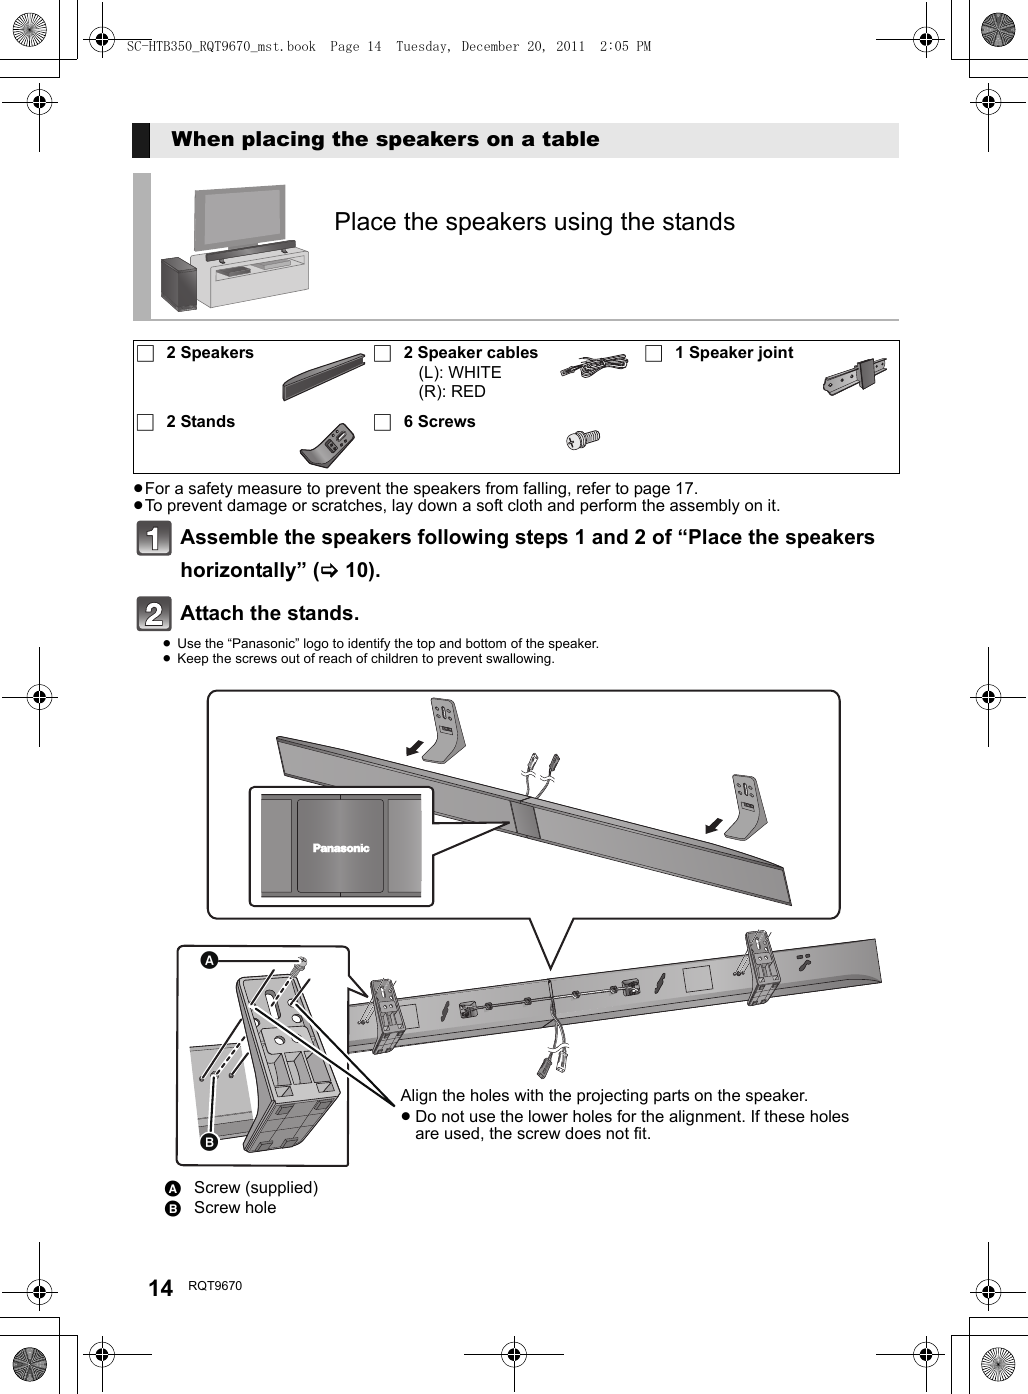 14 RQT9670≥For a safety measure to prevent the speakers from falling, refer to page 17.≥To prevent damage or scratches, lay down a soft cloth and perform the assembly on it.Assemble the speakers following steps 1 and 2 of “Place the speakers horizontally” (&gt;10).Attach the stands. ≥Use the “Panasonic” logo to identify the top and bottom of the speaker.≥Keep the screws out of reach of children to prevent swallowing.When placing the speakers on a tablePlace the speakers using the stands∏2 Speakers ∏2 Speaker cables(L): WHITE(R): RED∏1 Speaker joint∏2 Stands ∏6 ScrewsAScrew (supplied)BScrew holeAlign the holes with the projecting parts on the speaker.≥Do not use the lower holes for the alignment. If these holes are used, the screw does not fit.SC-HTB350_RQT9670_mst.book  Page 14  Tuesday, December 20, 2011  2:05 PM